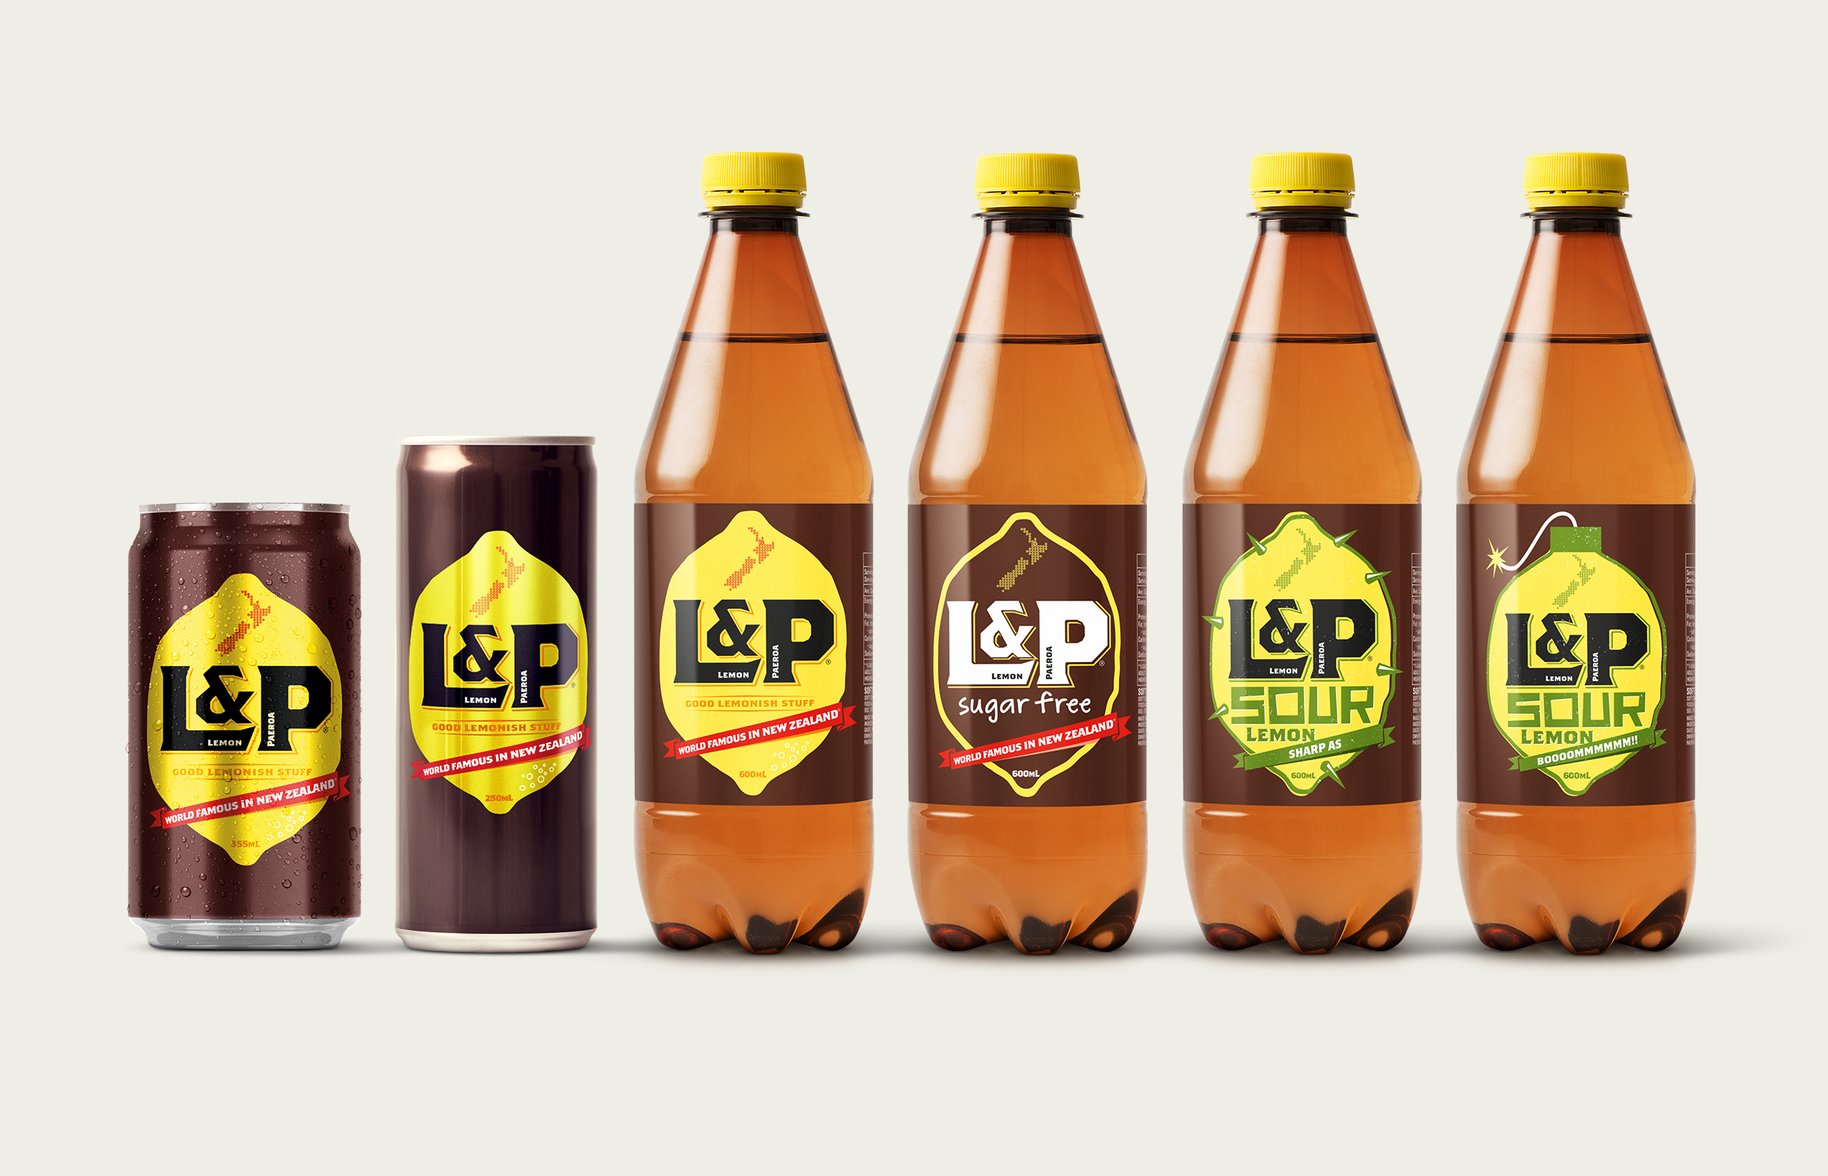 L&P product range packaging lineup